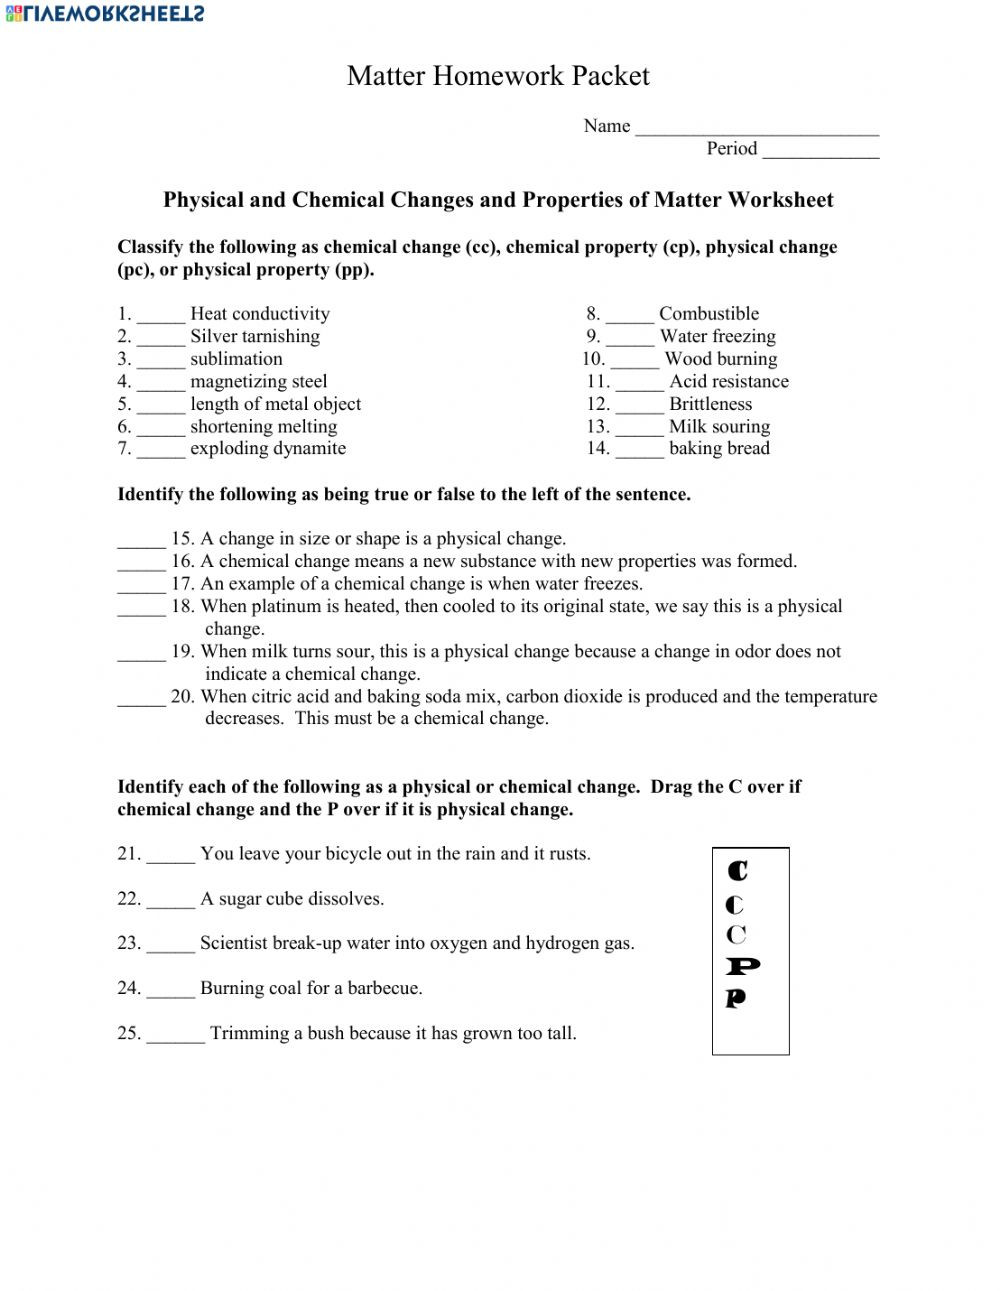 Classifying Matter Worksheet Answers Properties and Changes Of Matter Interactive Worksheet